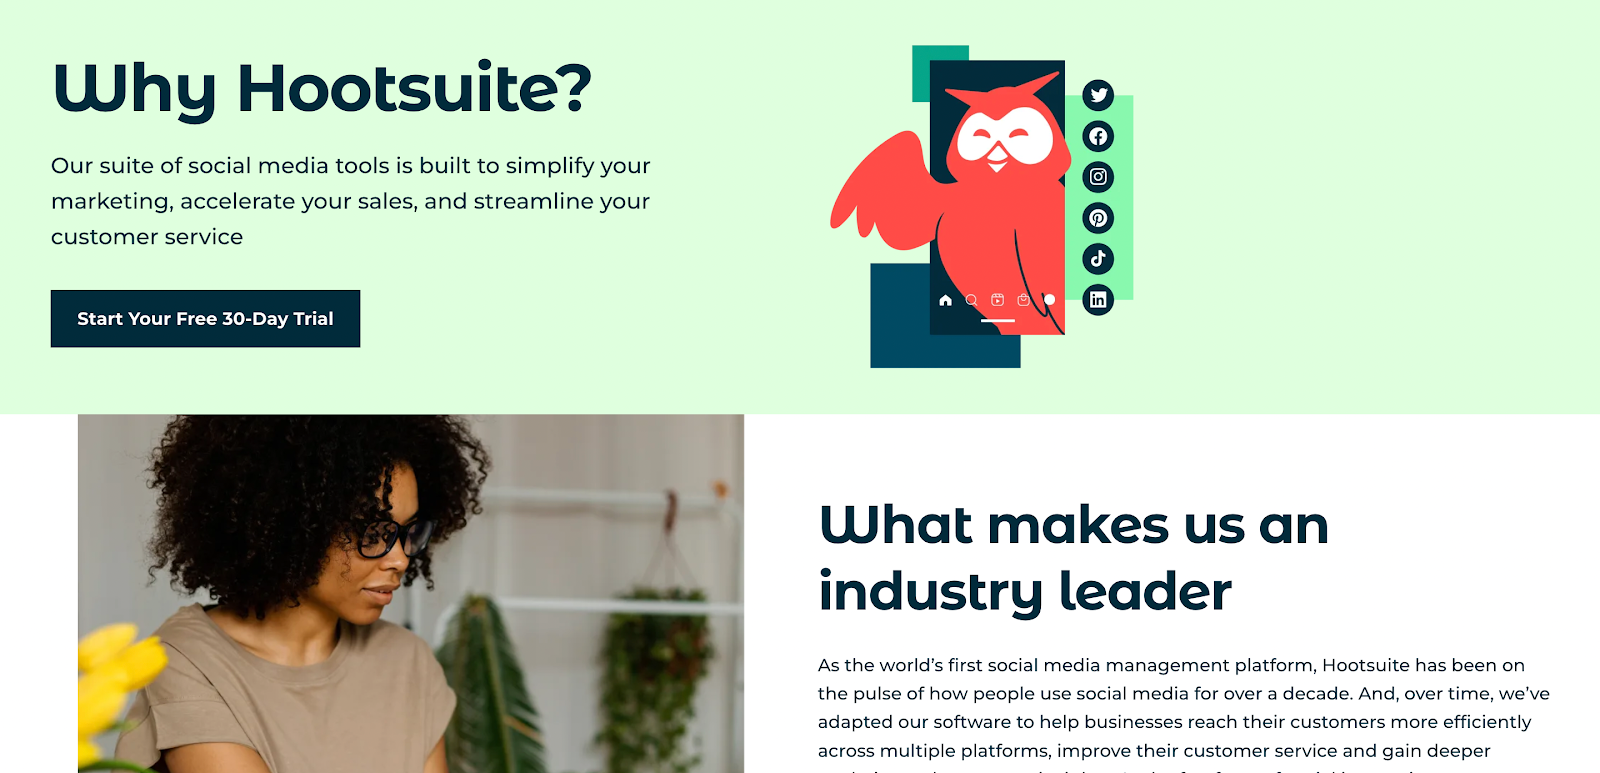 Final Thoughts: Why Do You Need Hootsuite Social Media Management Tool?